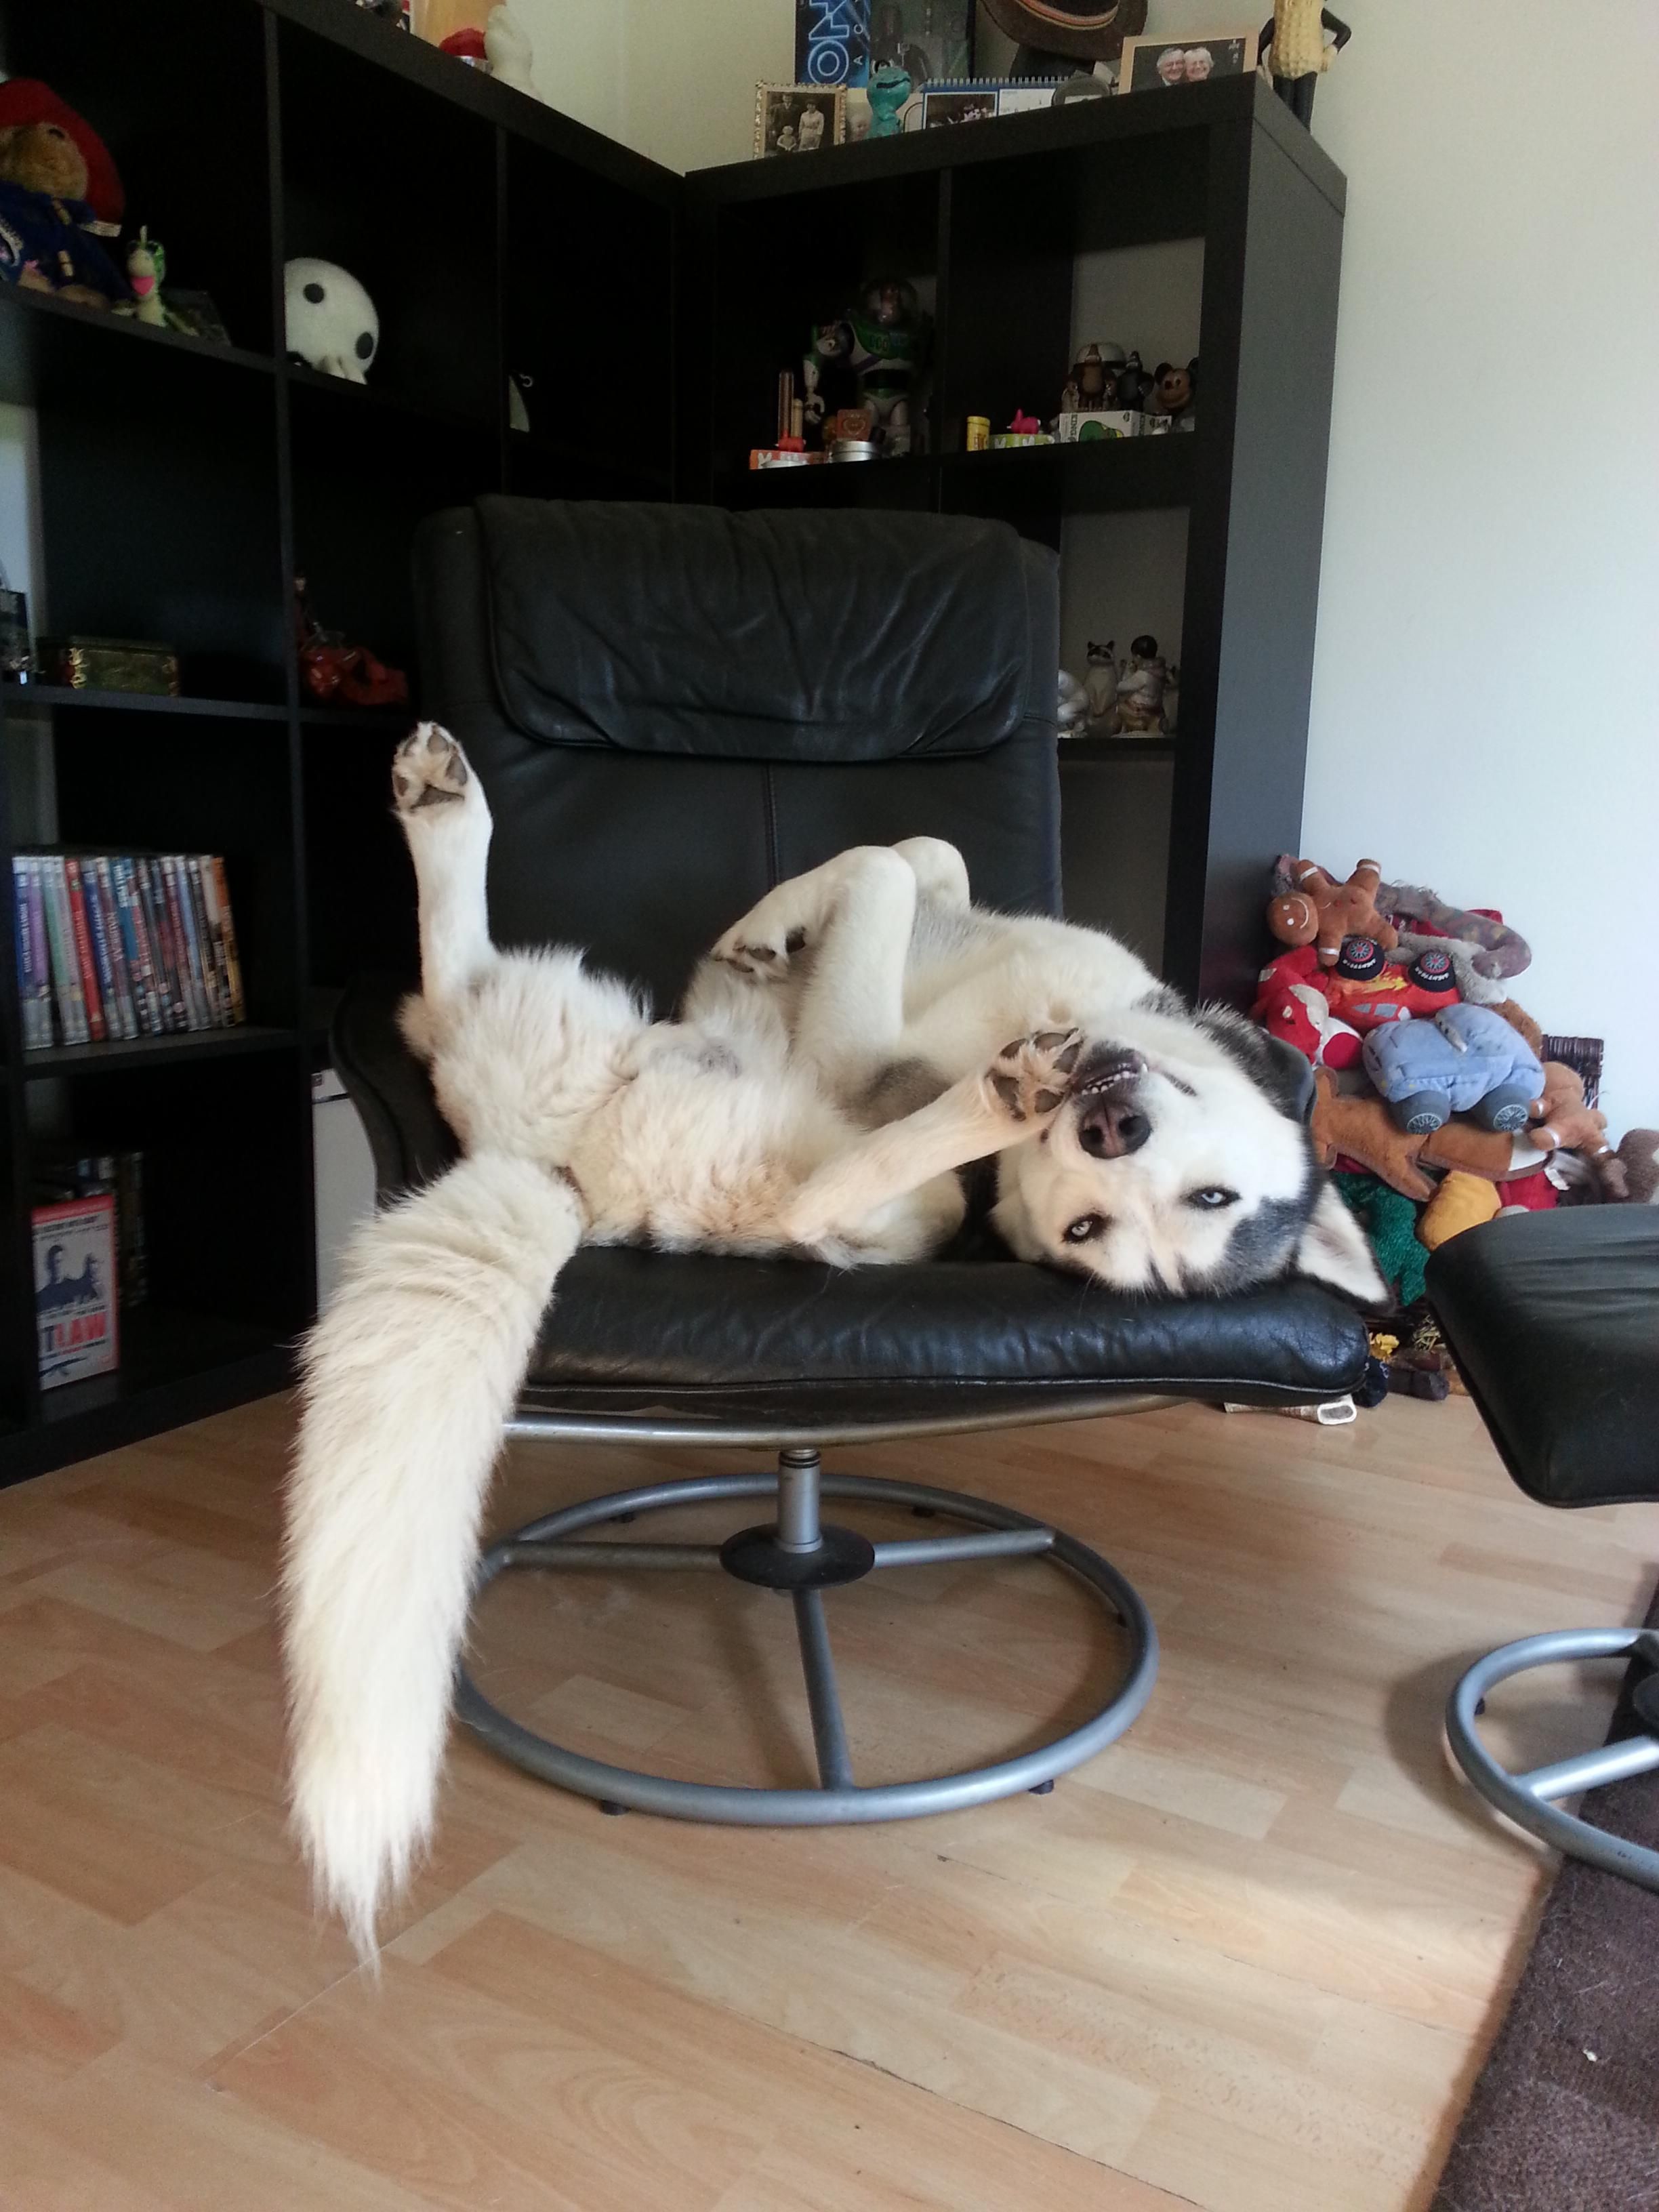 Husky lying on is back with its legs spread out on the chair